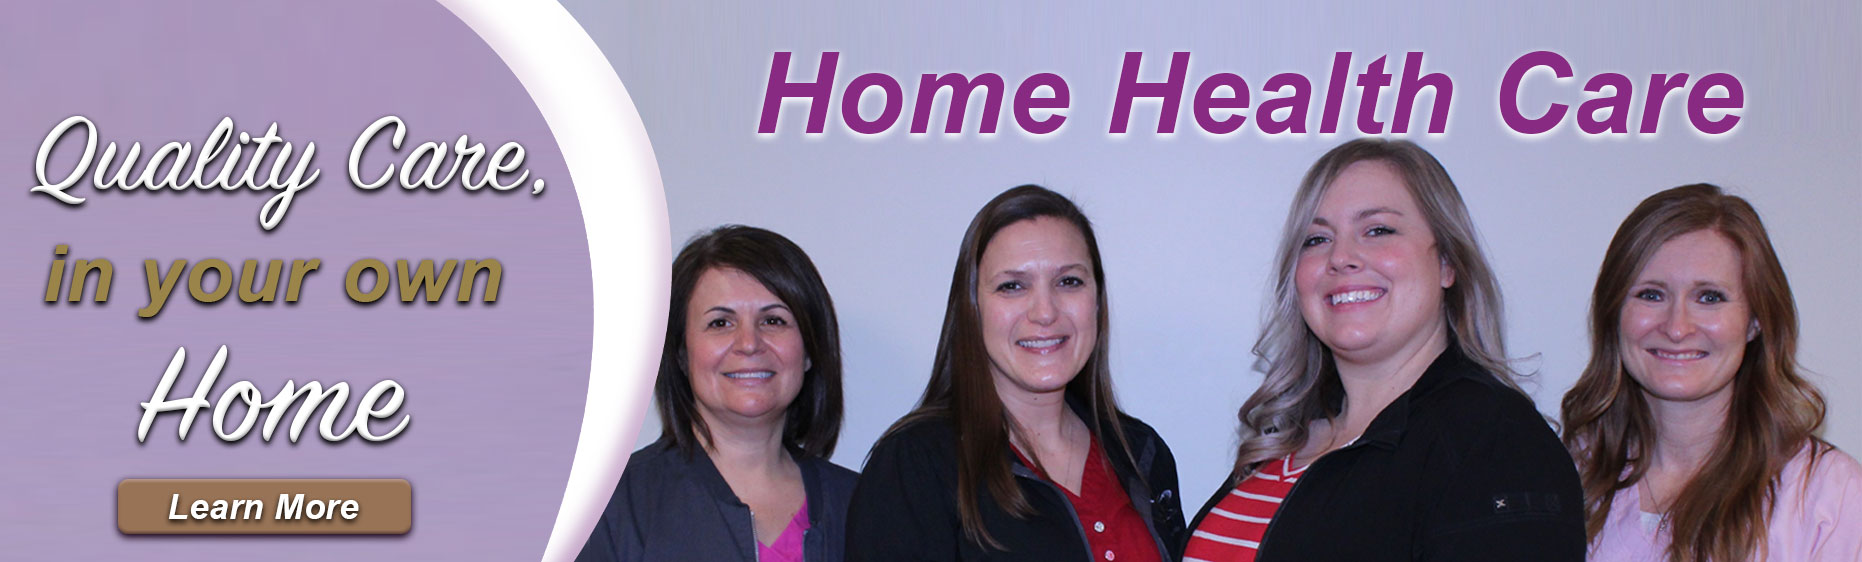 Quality Care in your own home. Learn More. Home Health Care.